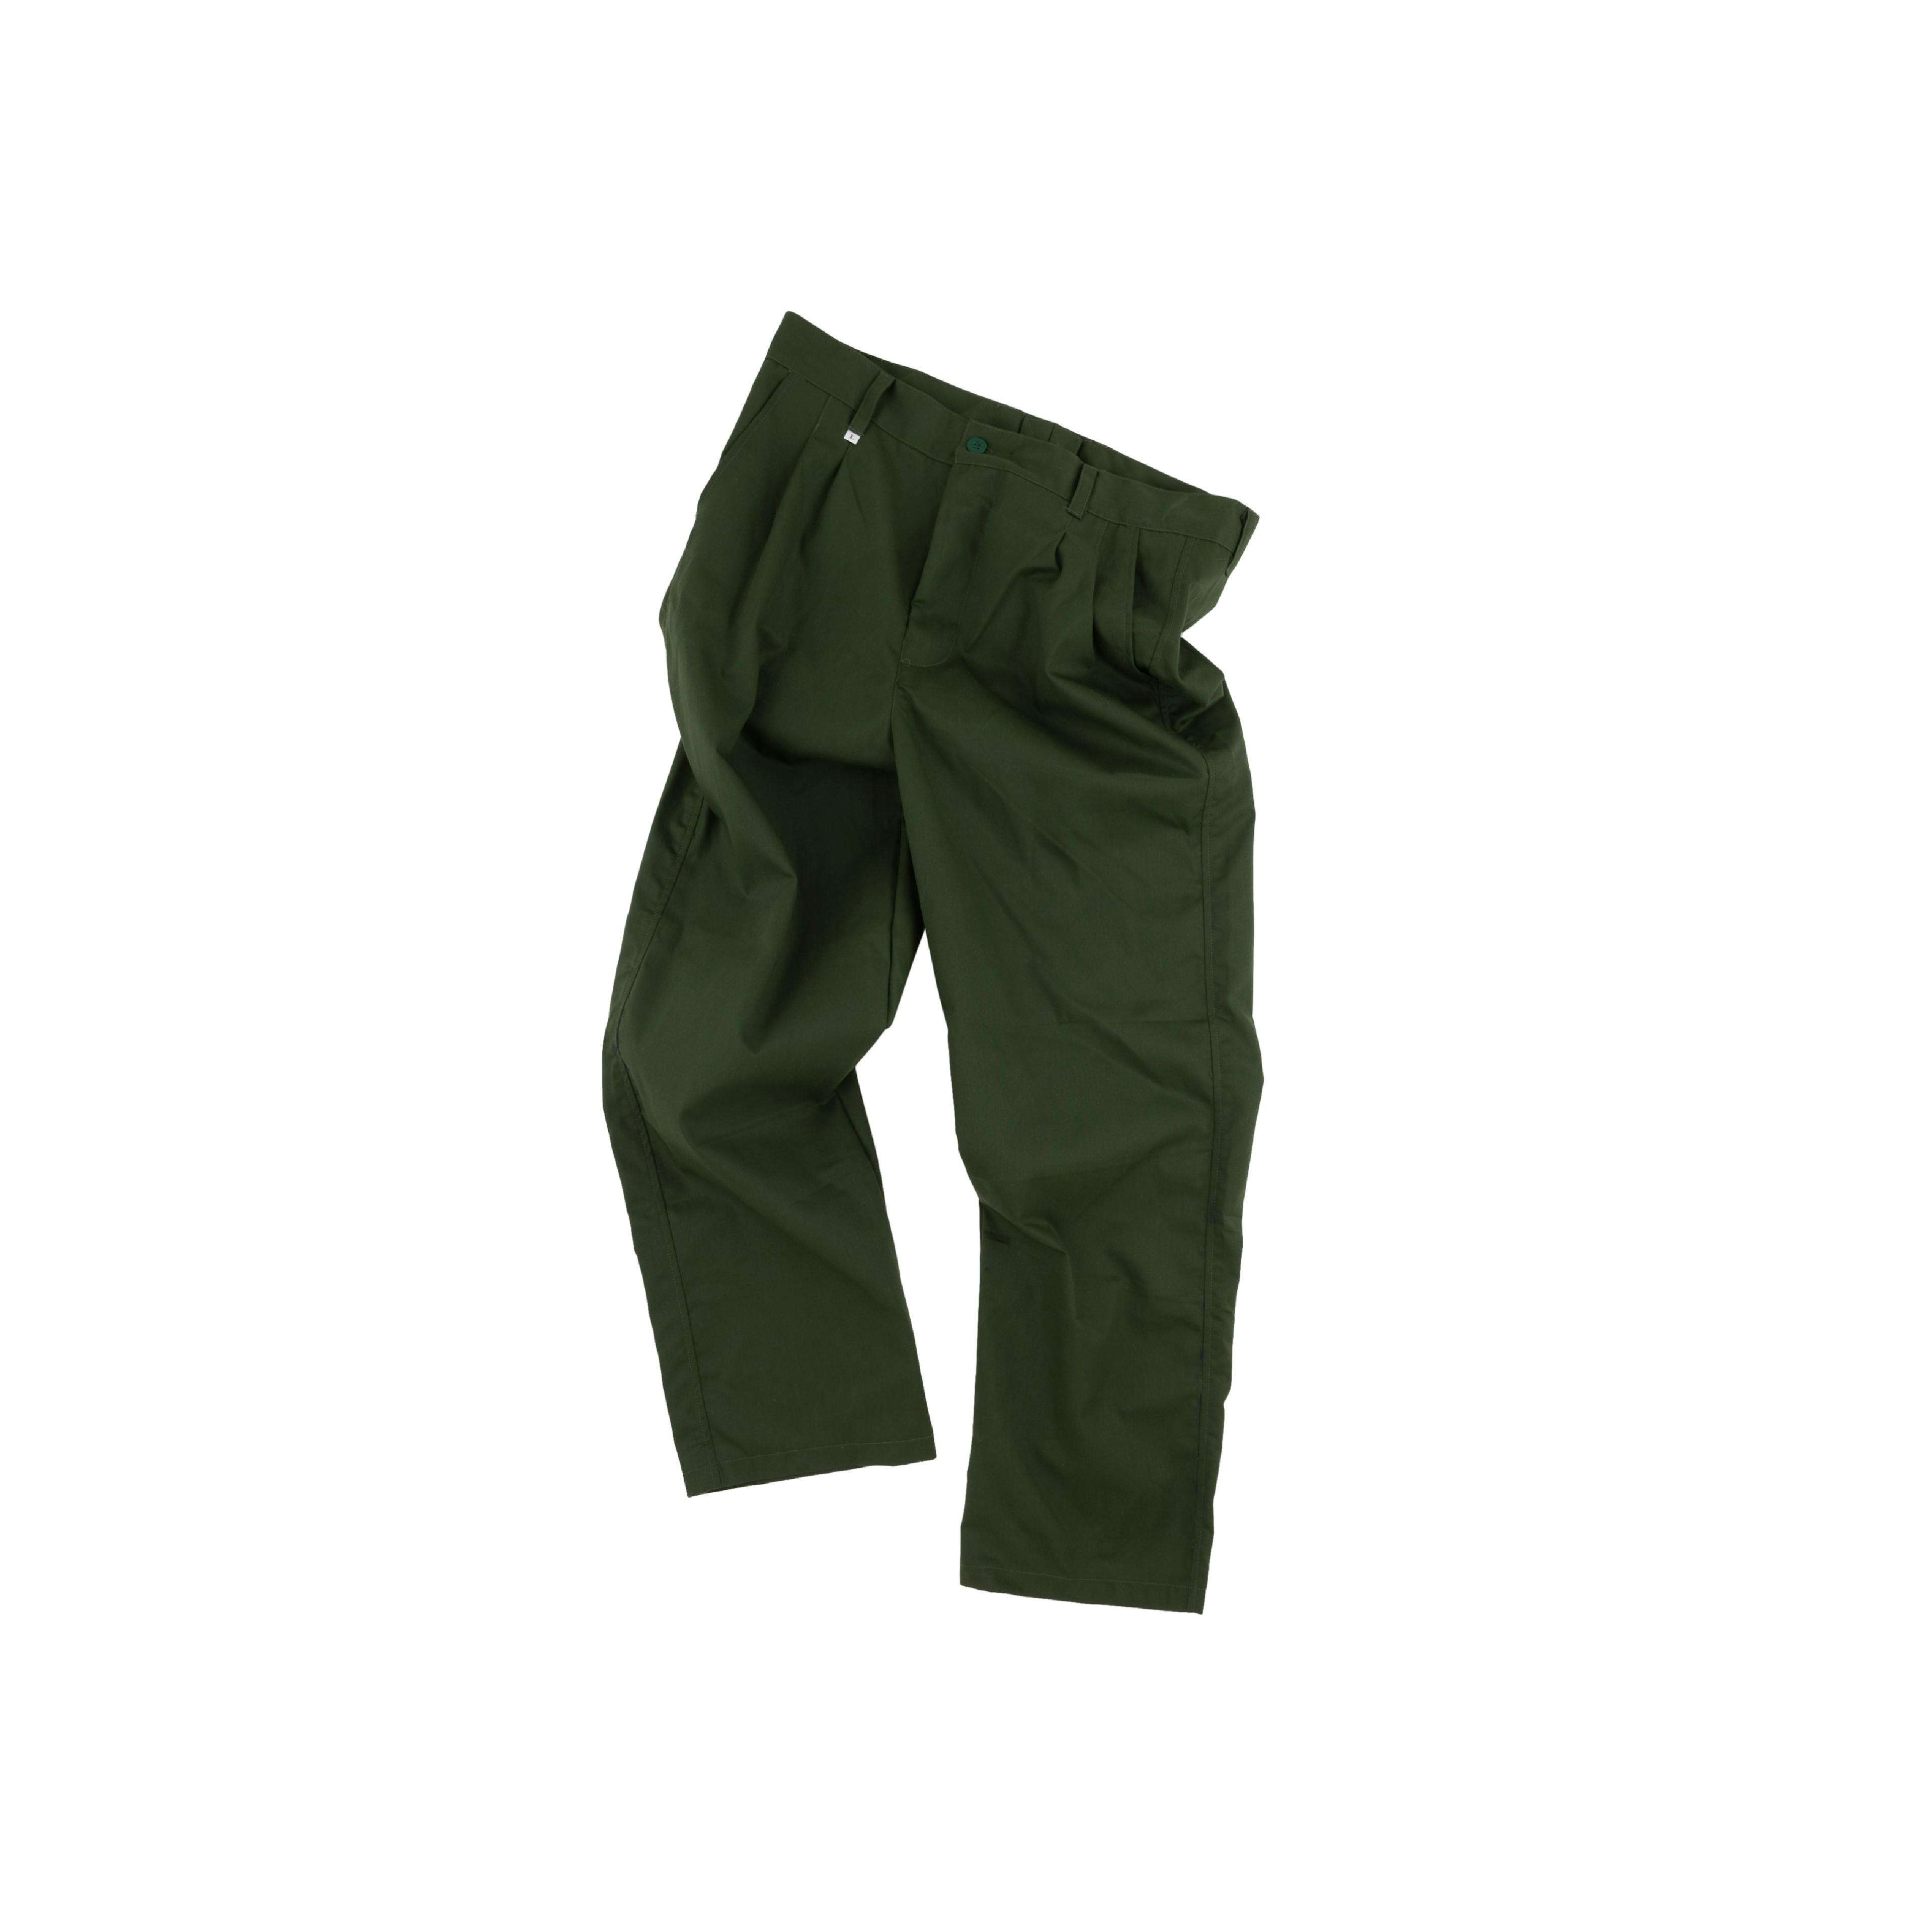 a green work pant = 3 of 5